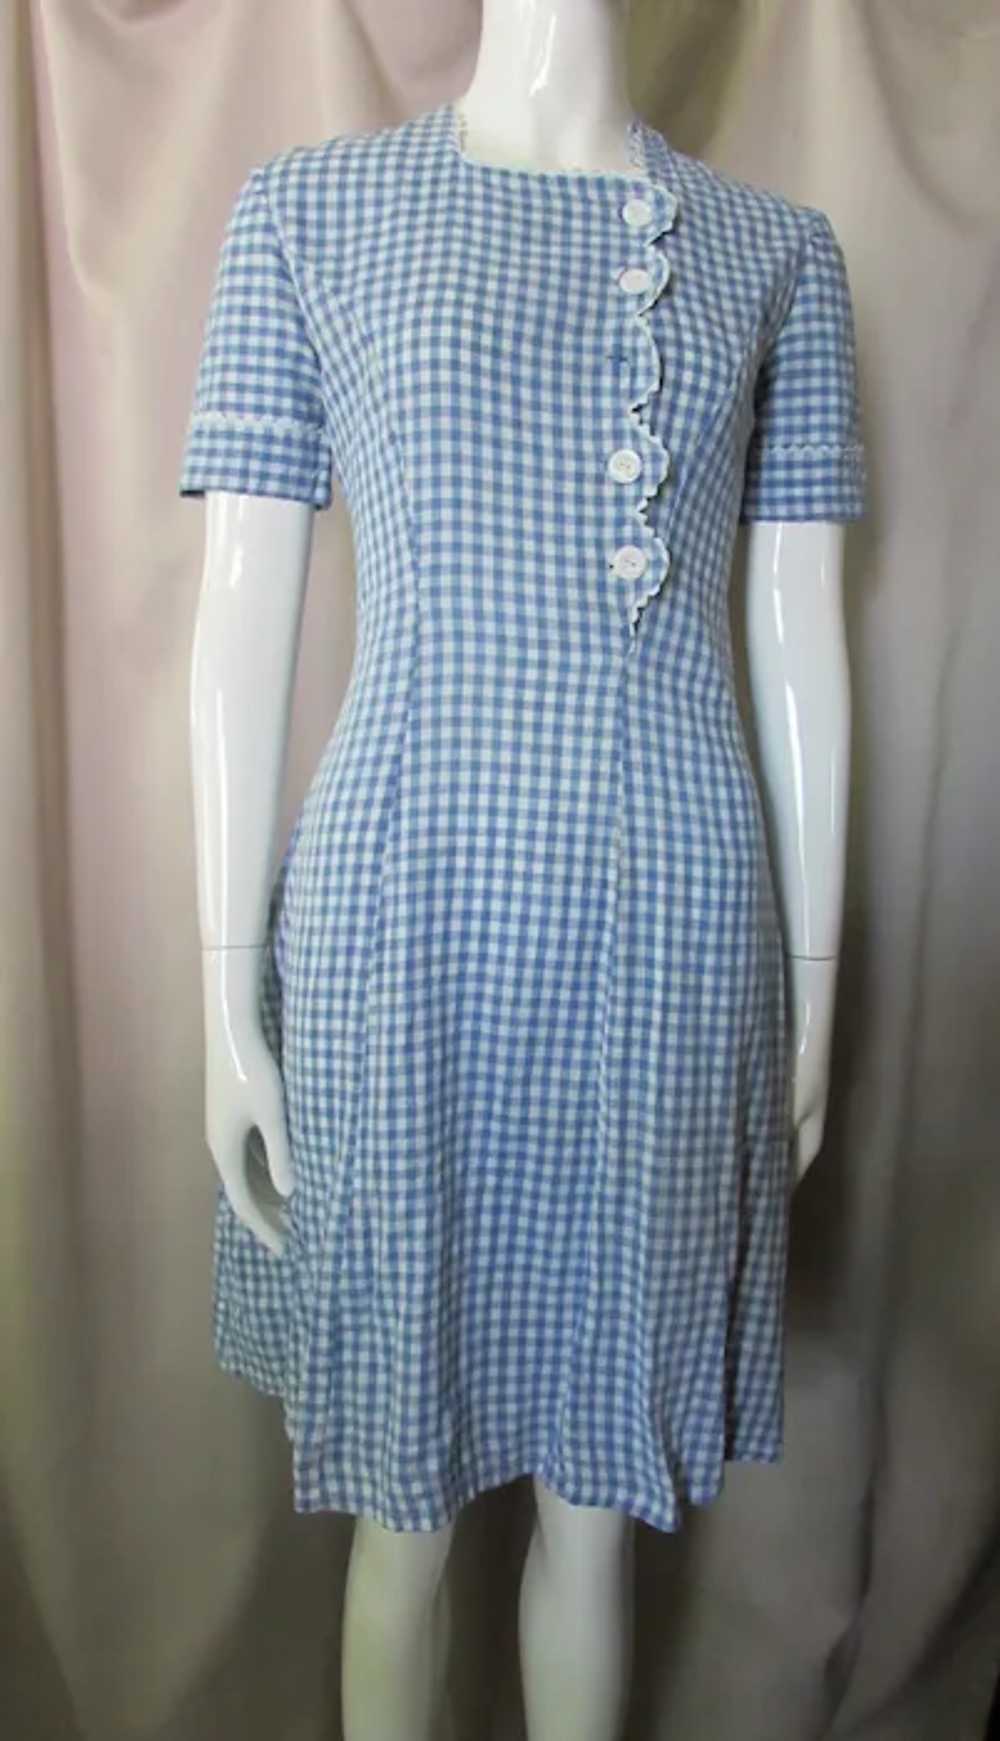 SALE Cutest Vintage Day Dress White & Blue Gingha… - image 2